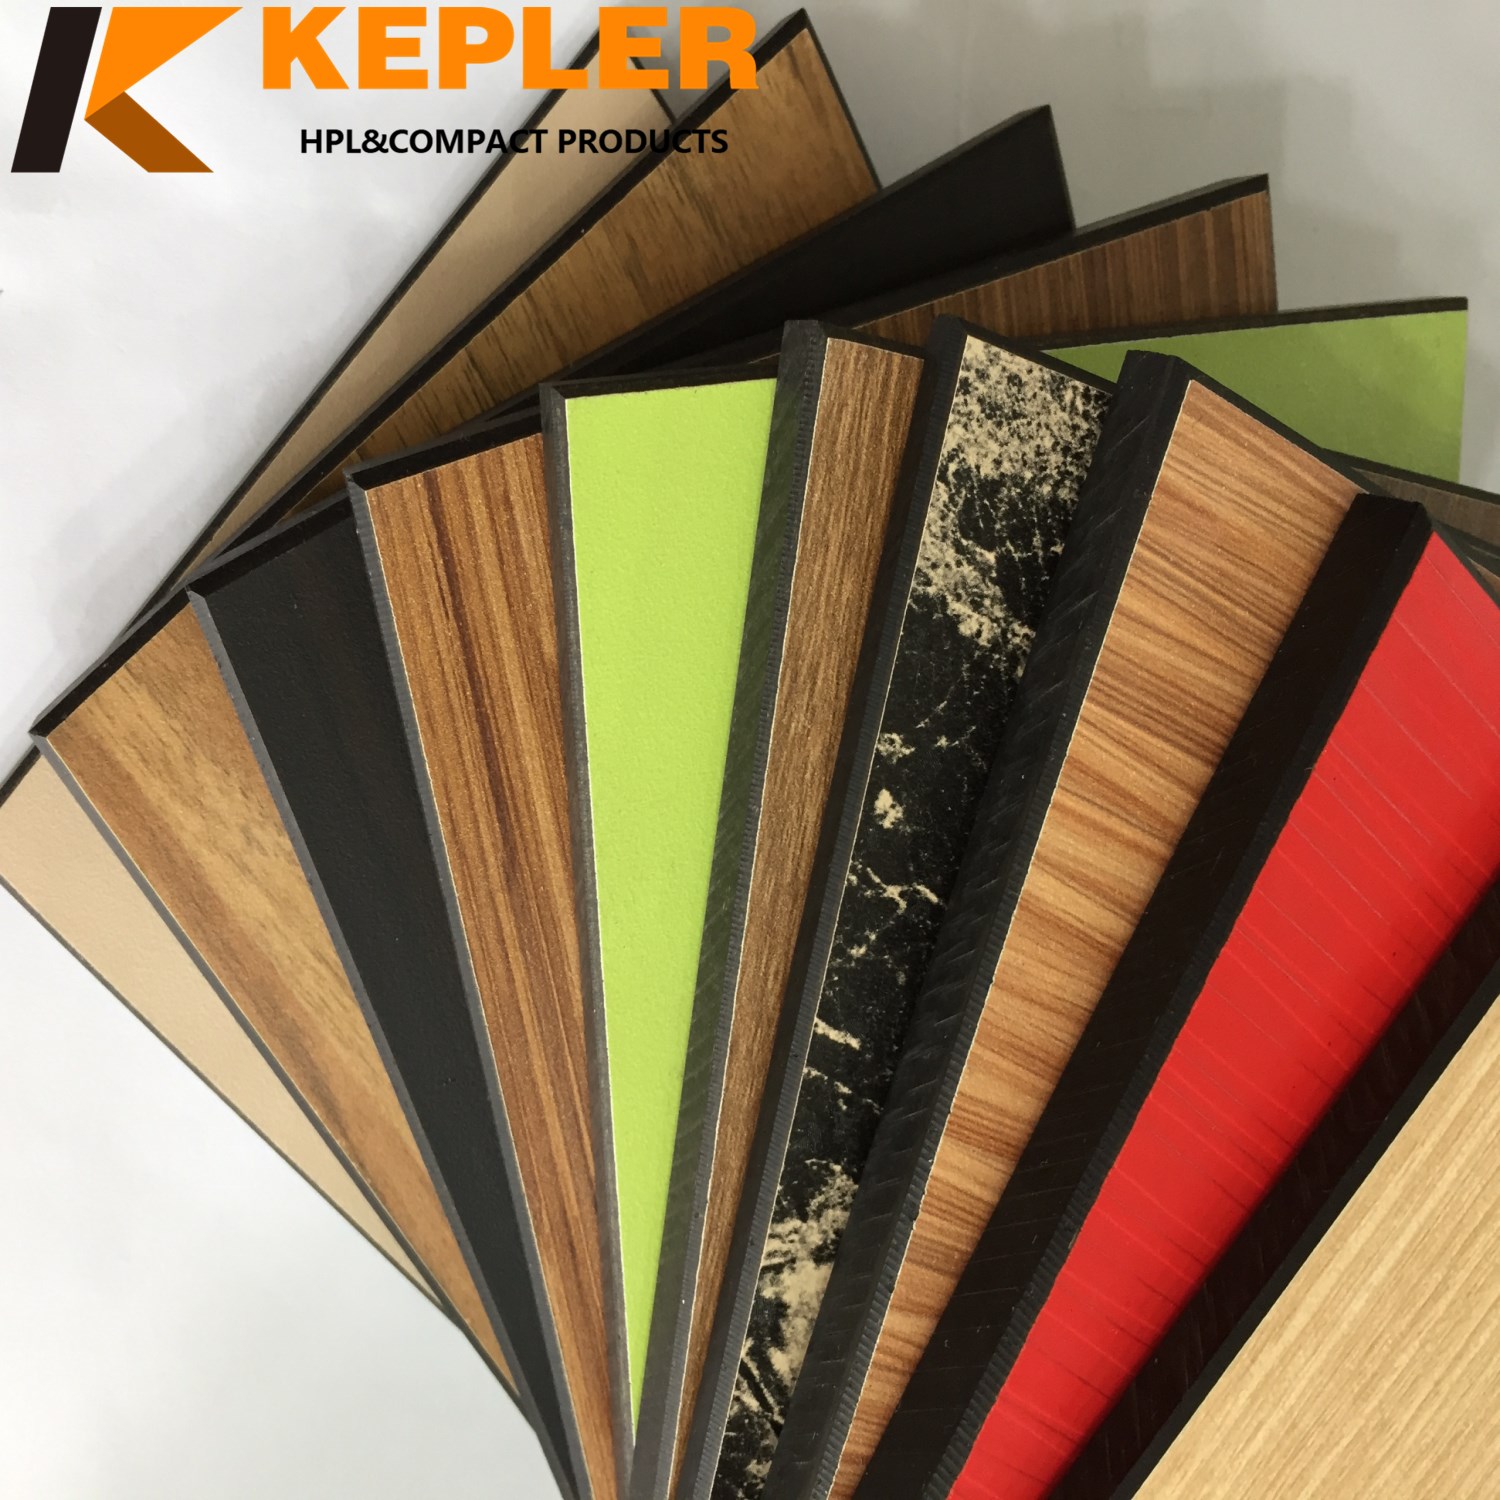 Kepler high quality rich colors phenolic resin compact laminate hpl board manufacturer in China